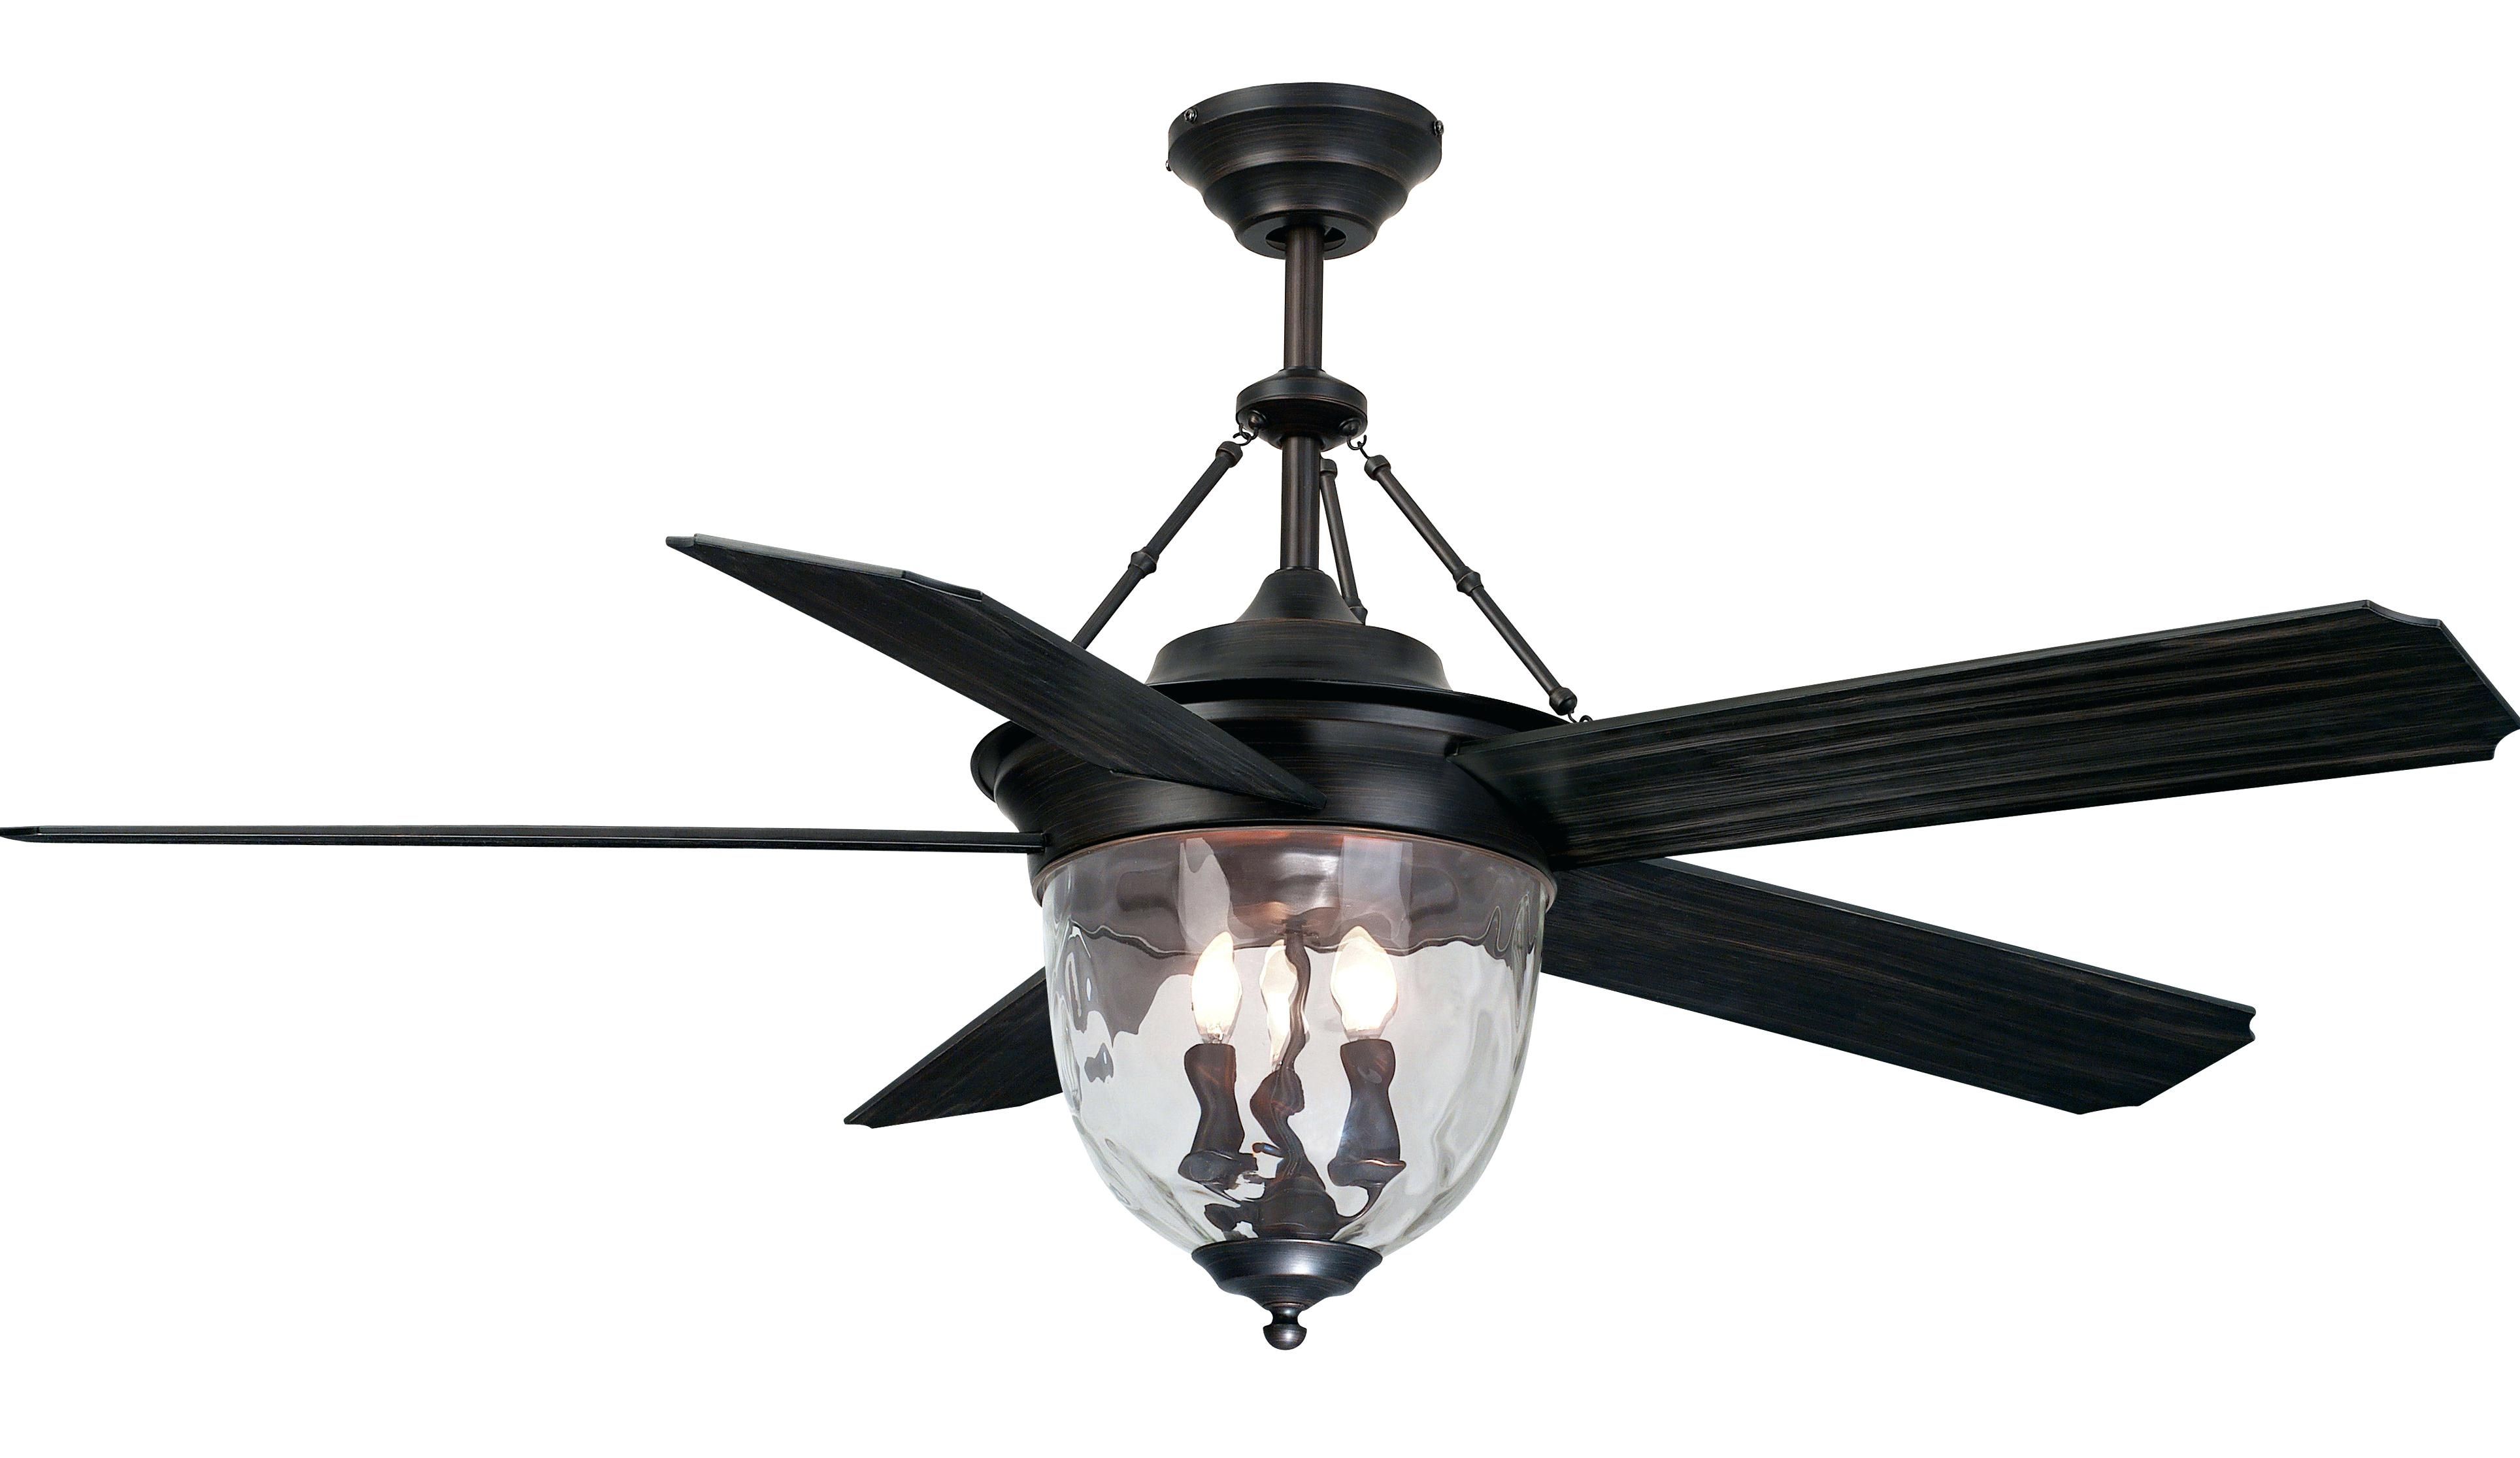 Popular Outdoor Ceiling Fans With Lights At Ebay Throughout Outdoor Ceiling Fans With Lights Tropical Fan And Company Hunter (View 6 of 20)